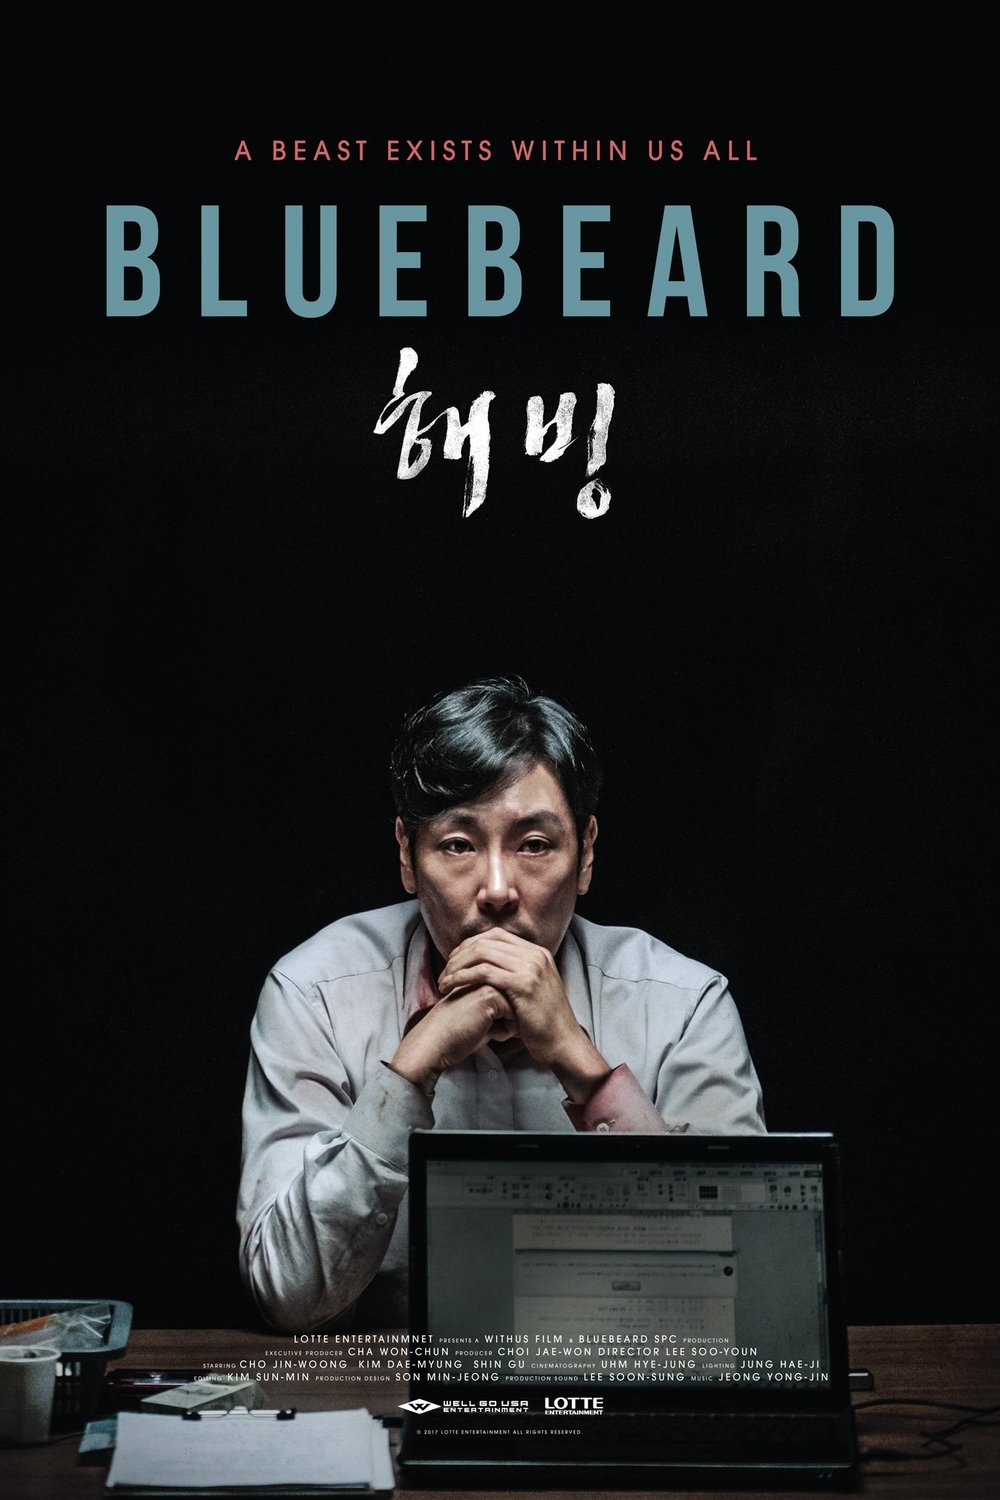 Poster of the movie Bluebeard